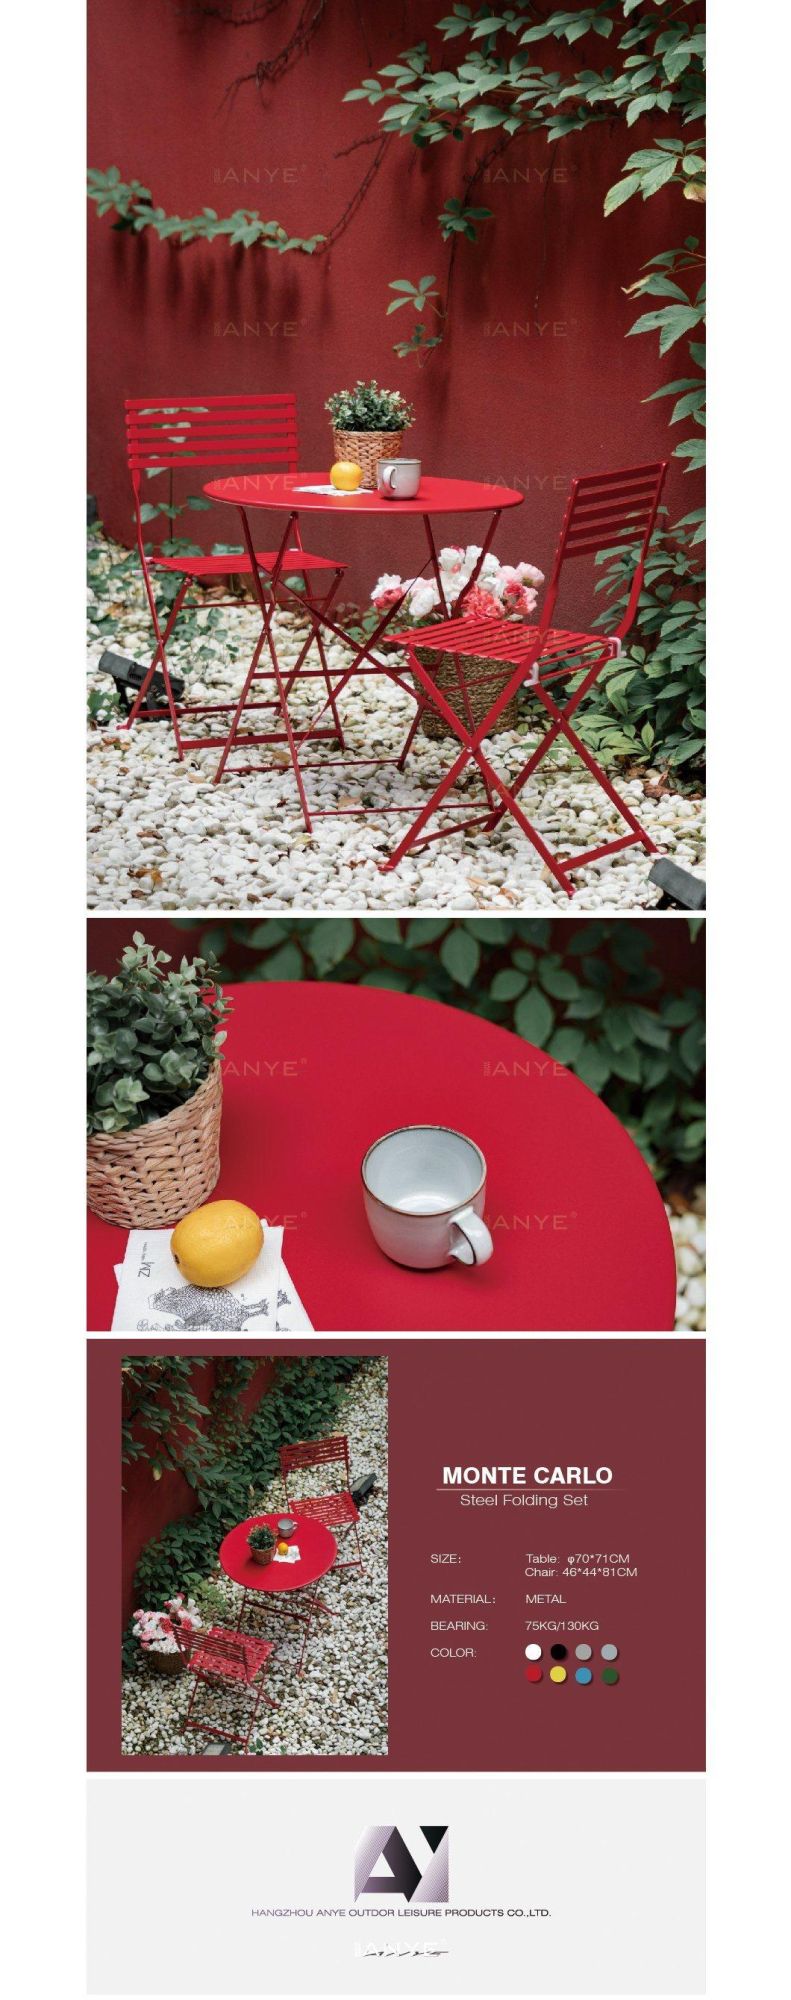 Patio Furniture Set Outdoor Steel Folding Furniture Coffee Table and Chair Portable Dining Set